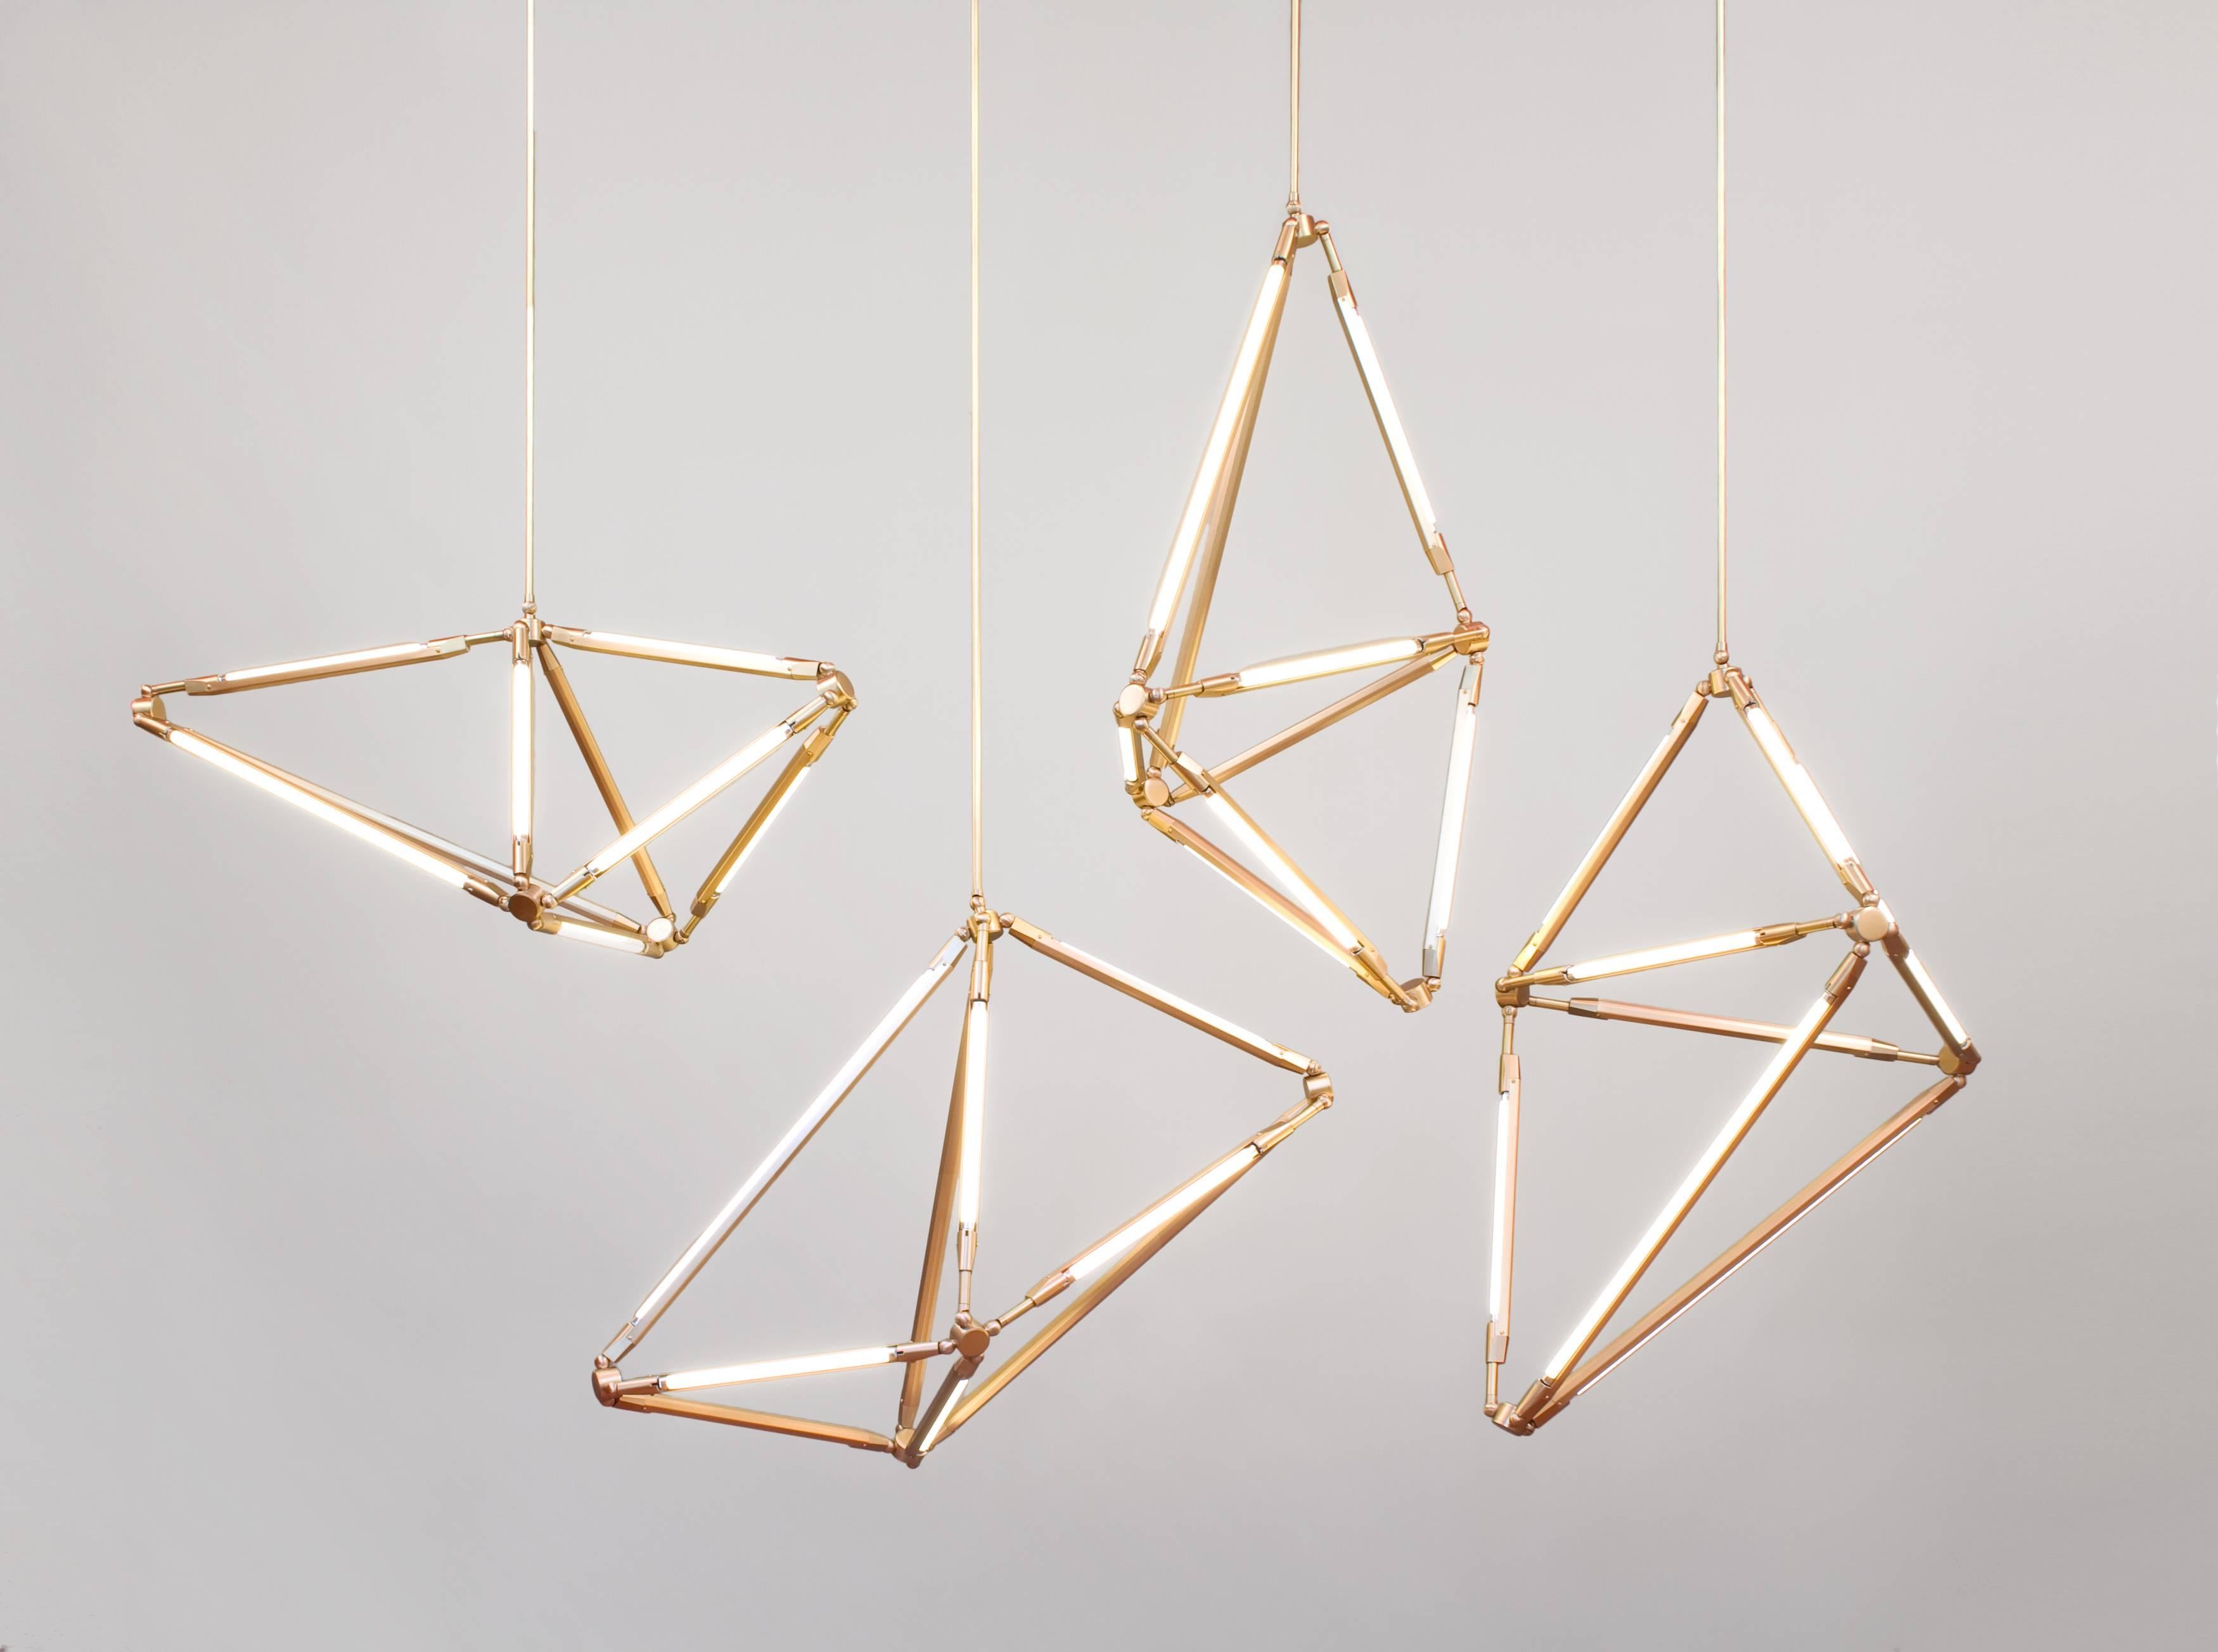 The Shy light uses the spare beauty of thin LED tubes to define the edges of its shape; in this way the function of the piece is created by its form, and vice-versa. It is also inspired by crystalline structures, both by the shapes they take as well